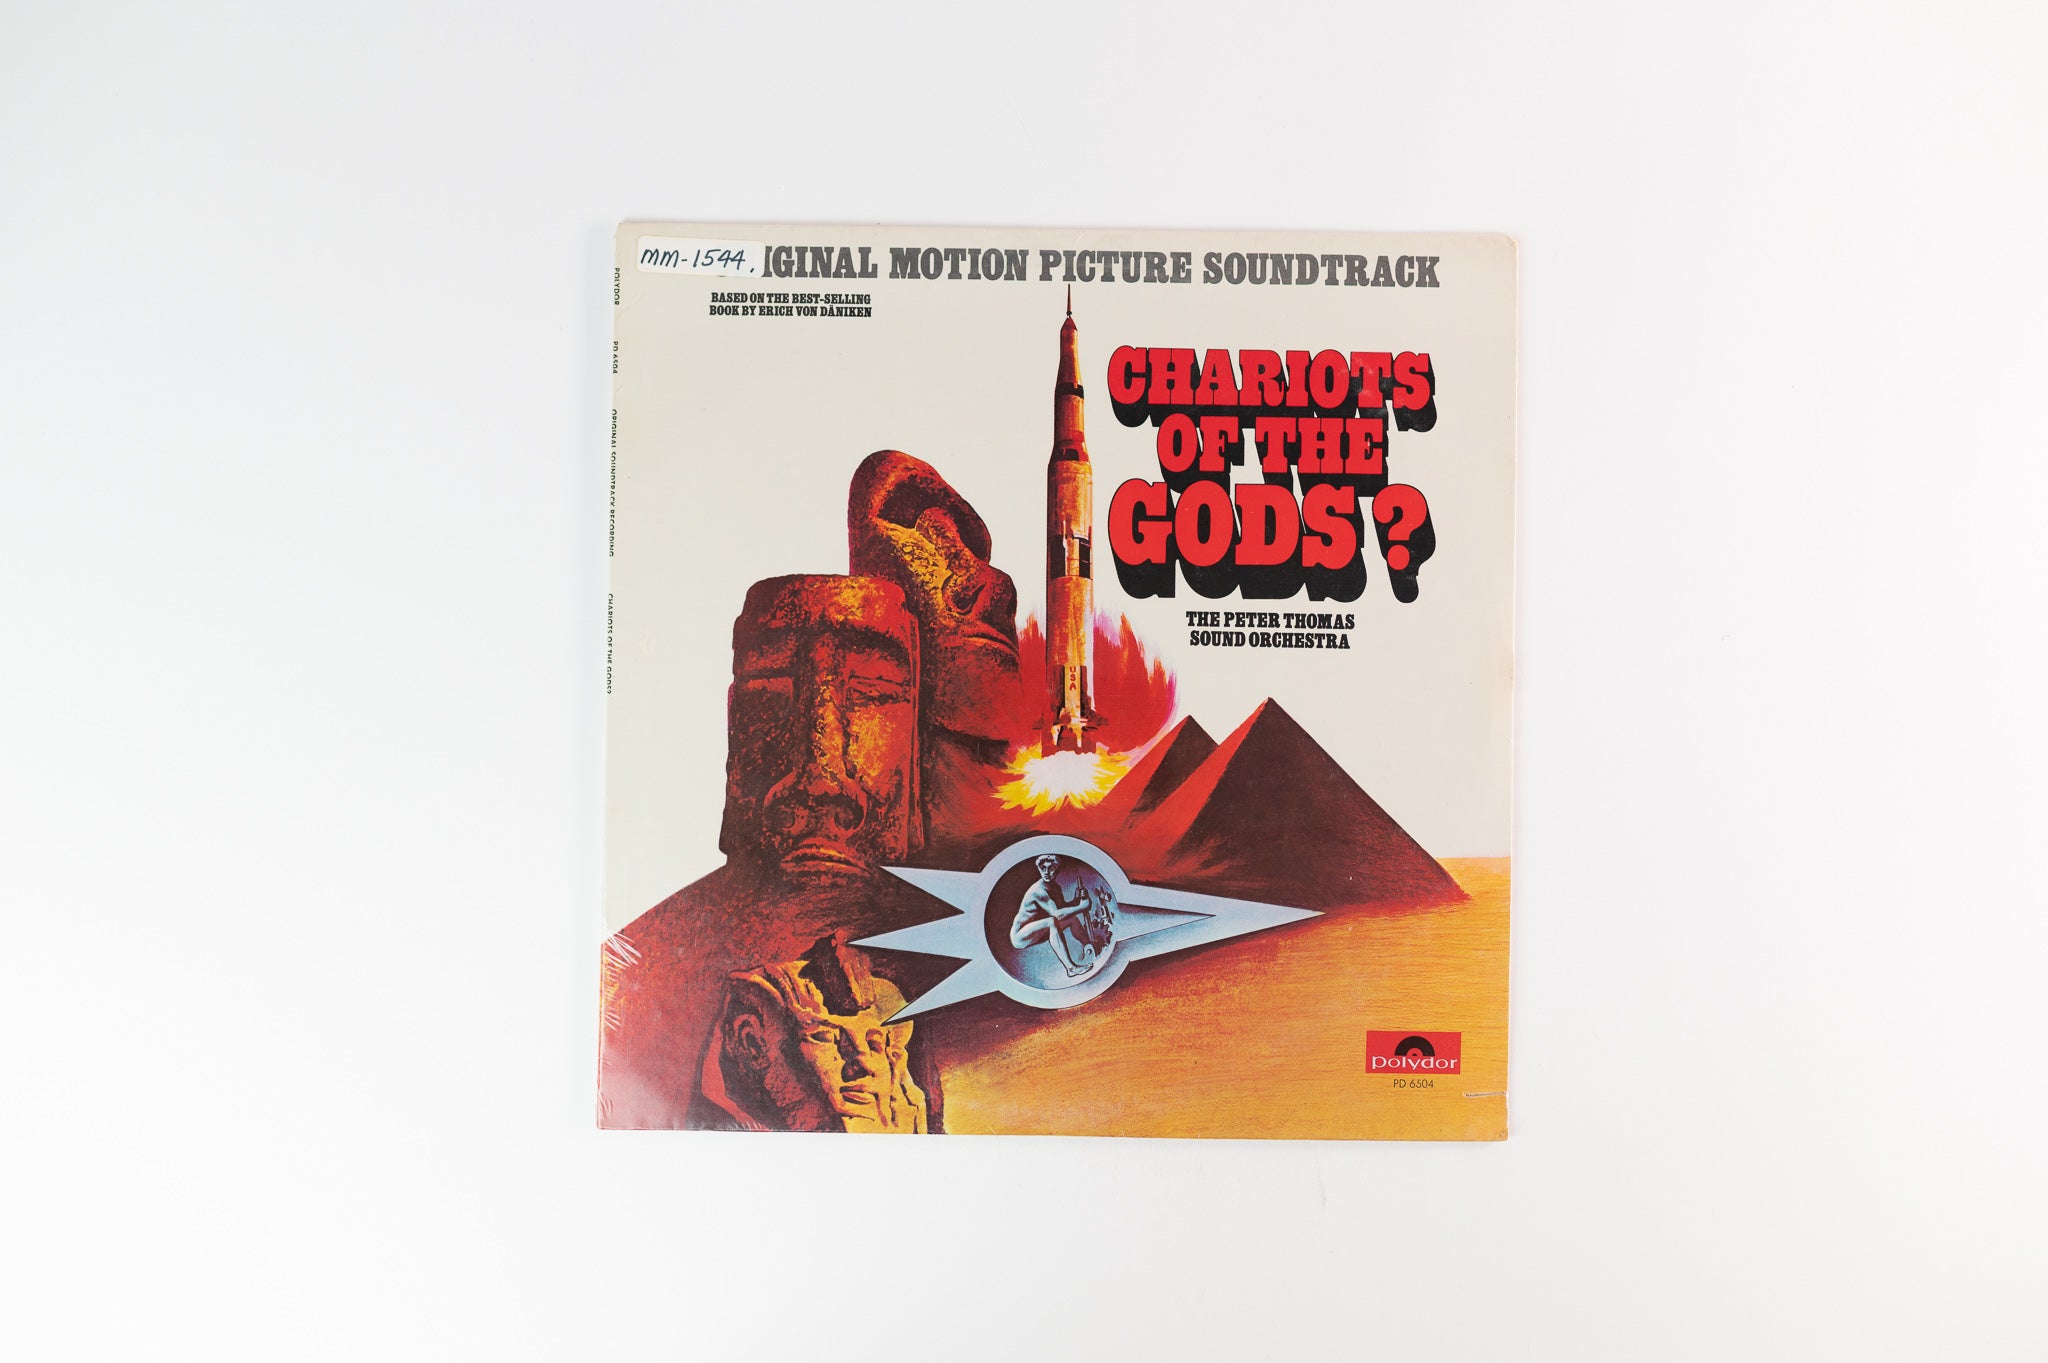 Peter Thomas Sound Orchestra - Chariots Of The Gods? Soundtrack on Polydor Sealed